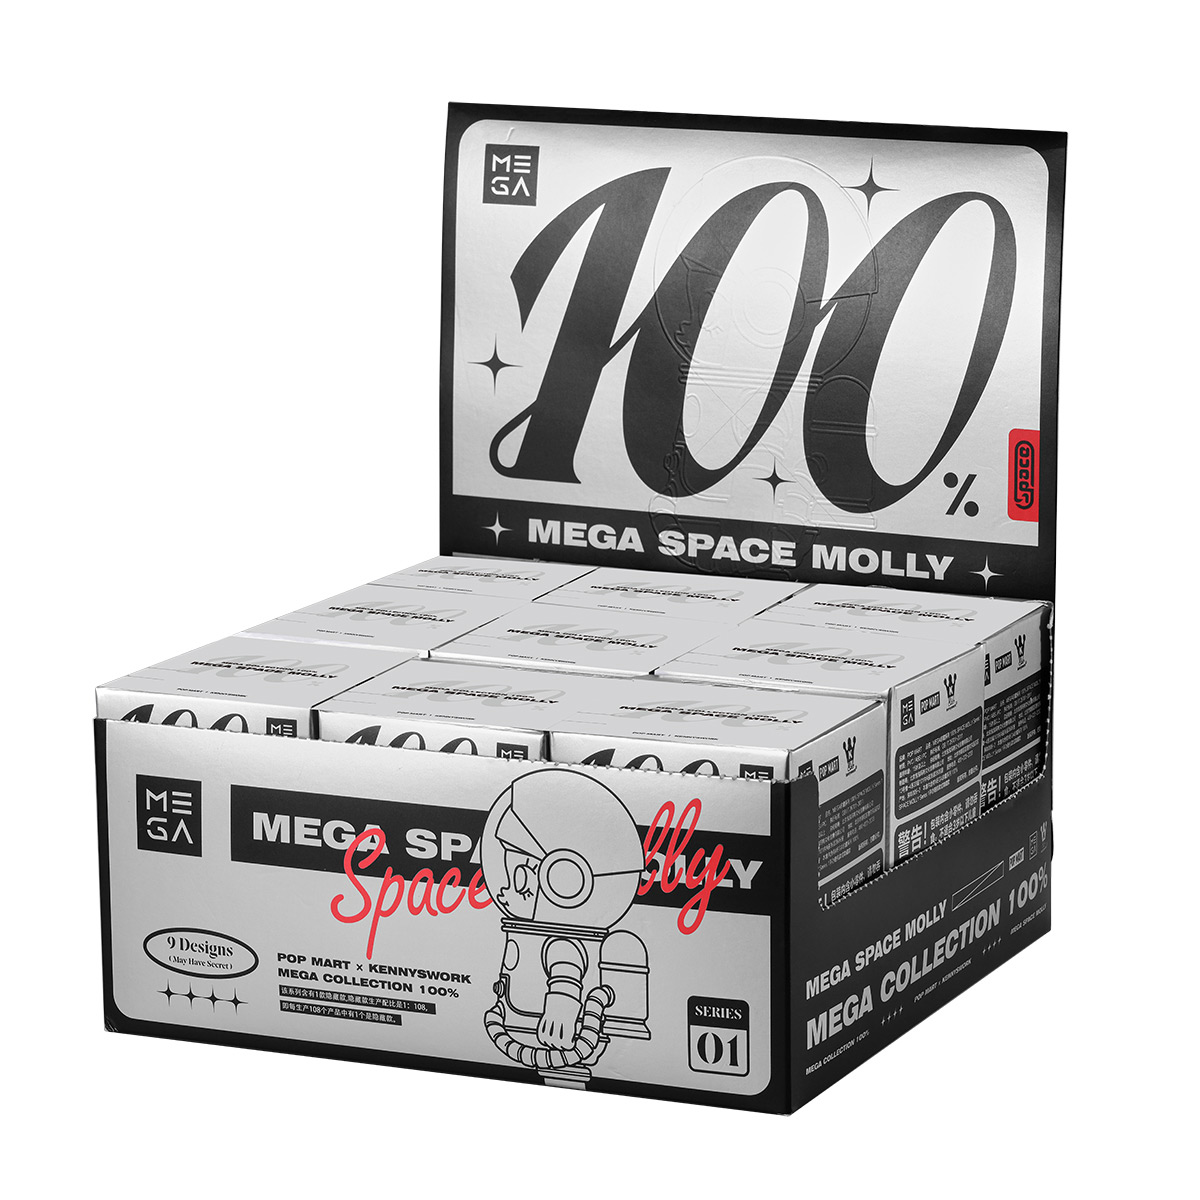 MEGA COLLECTION 100% SPACE MOLLY Series 1 - Blind Box - POP MART (Canada)